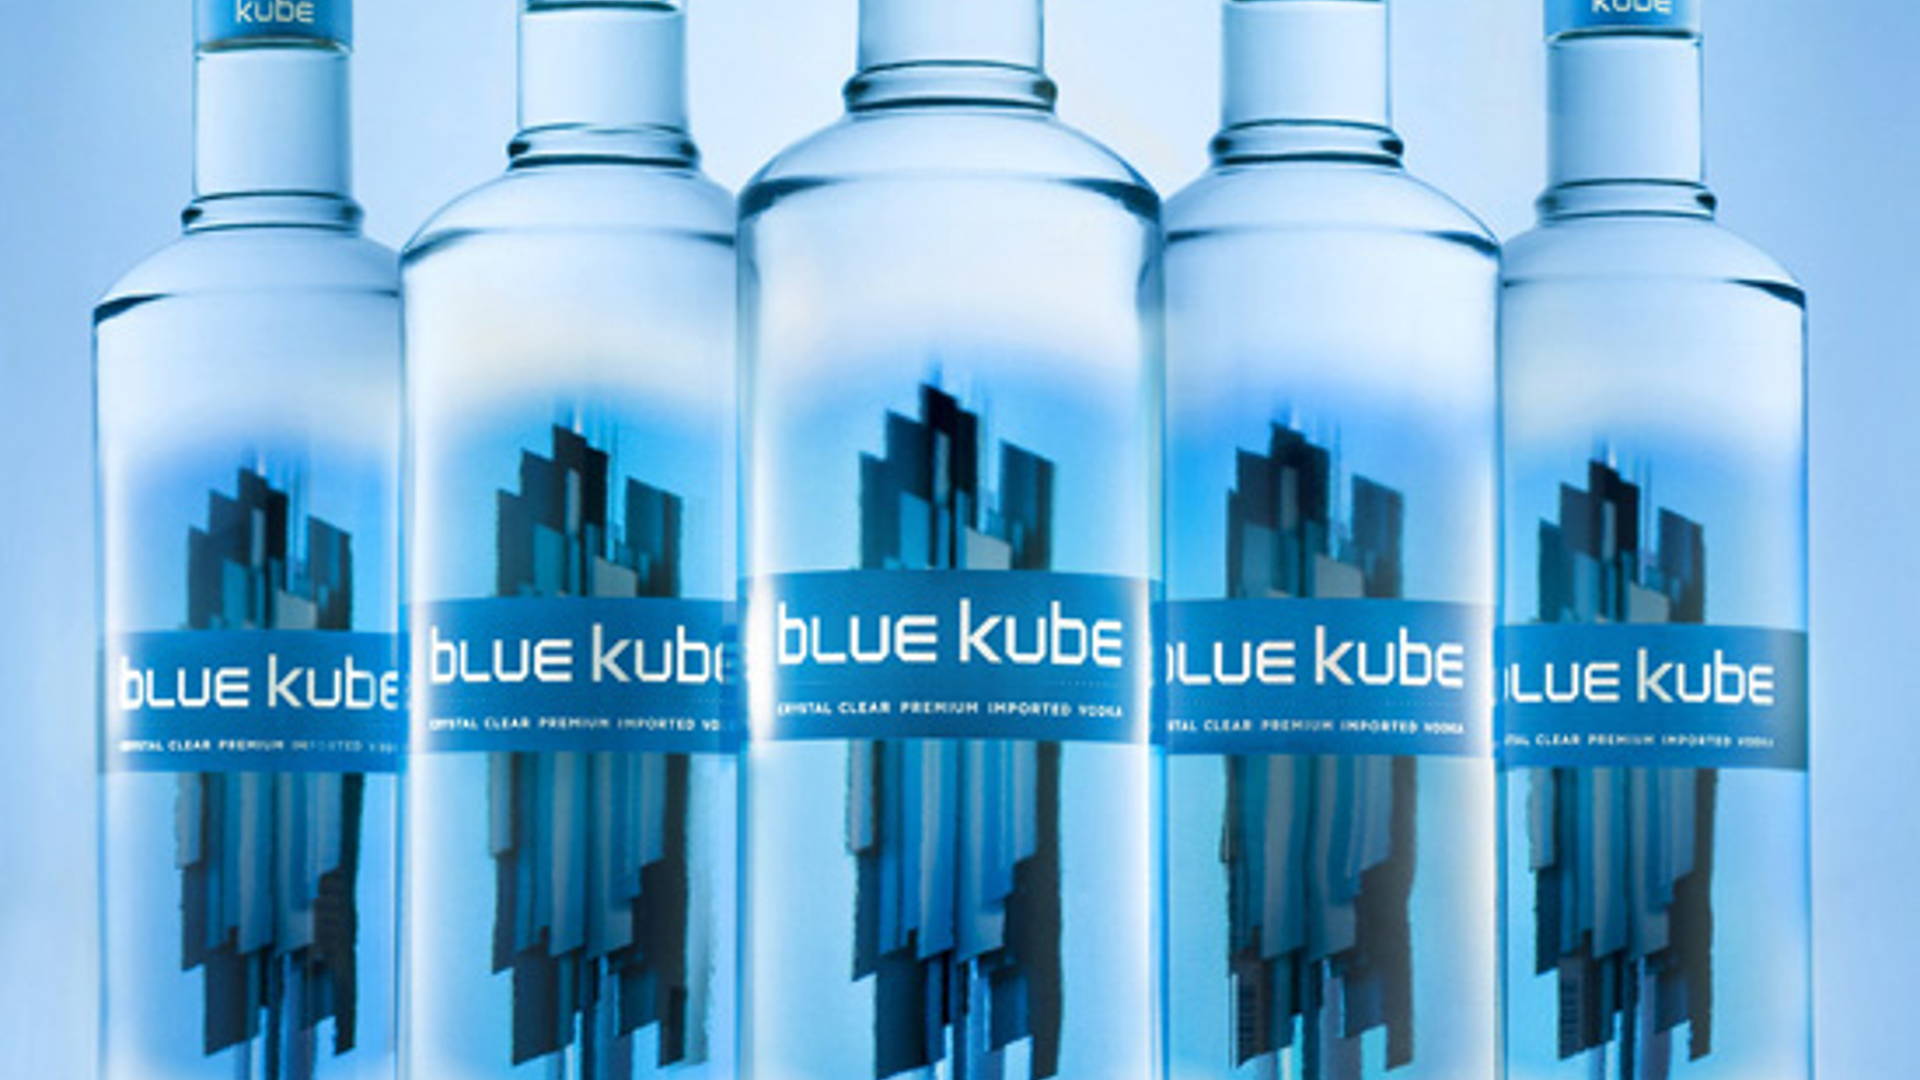 Featured image for Blue Kube Vodka